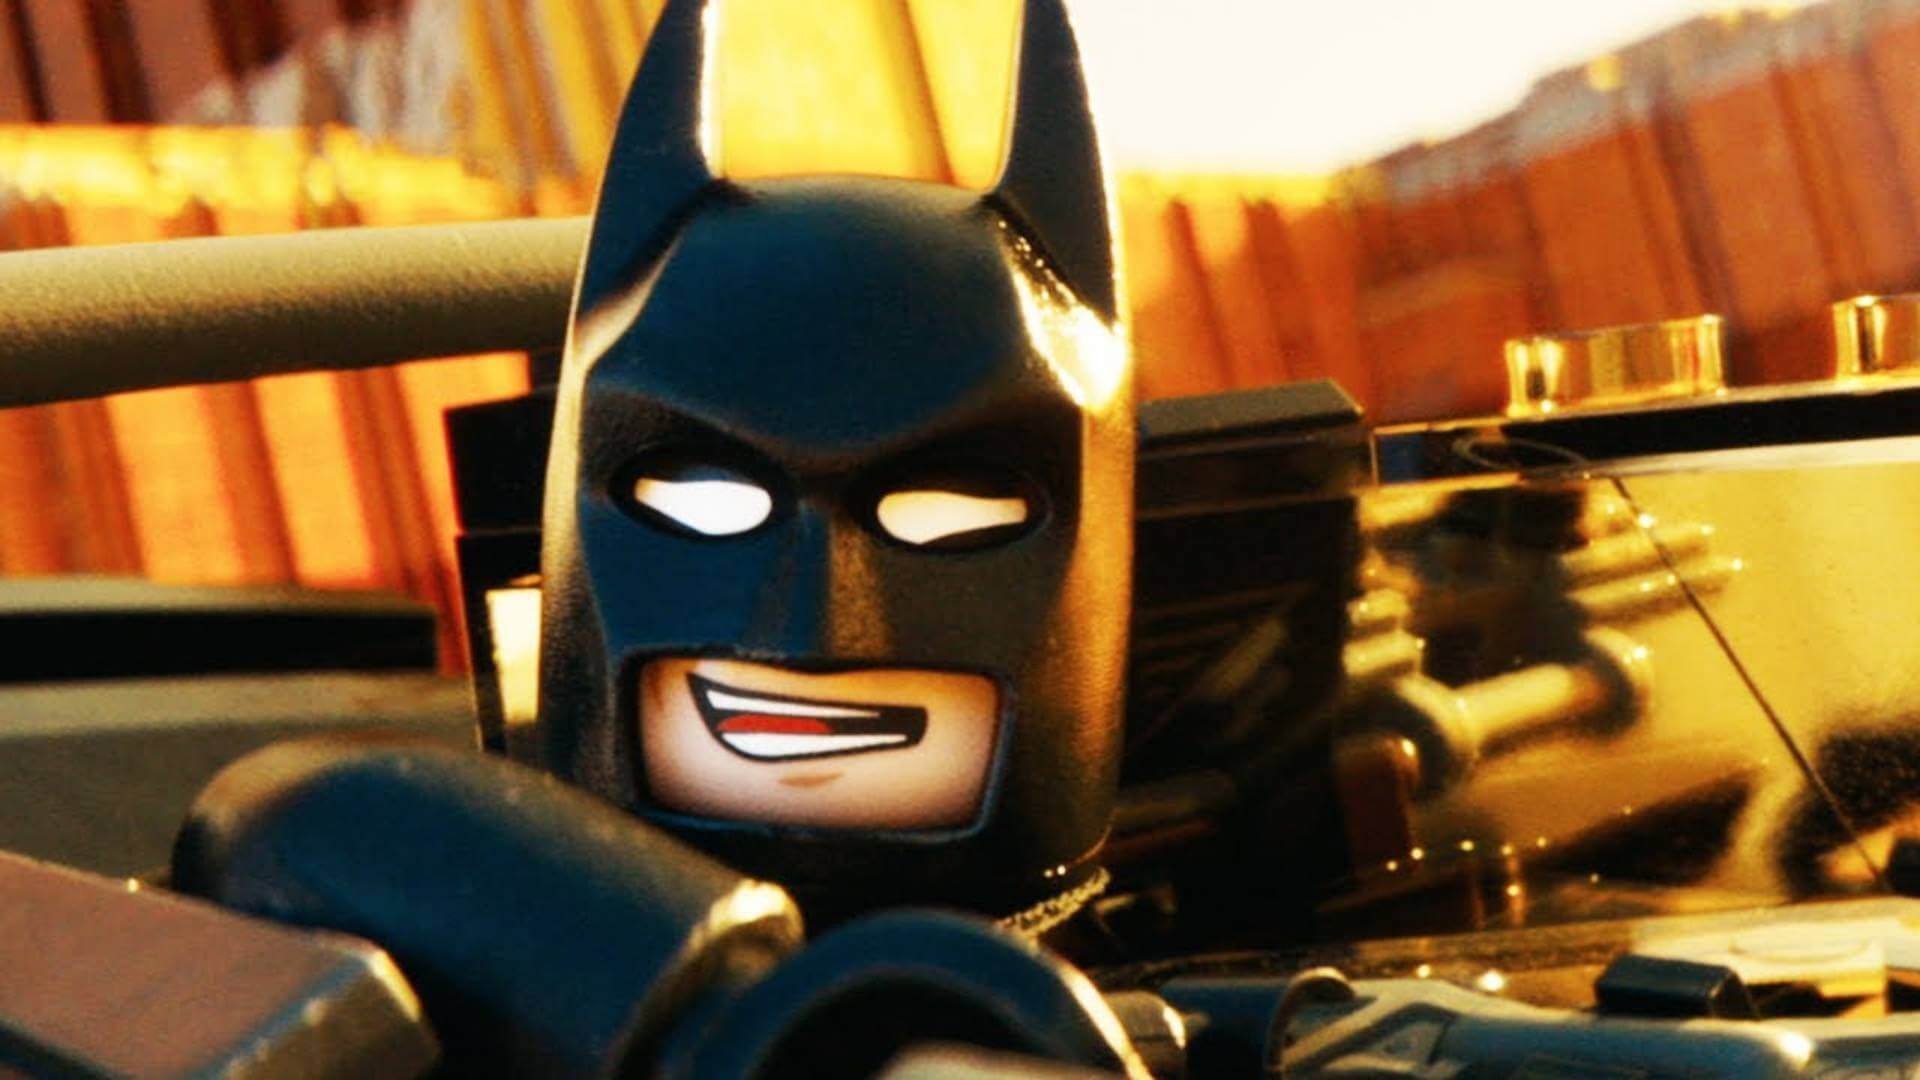 Based on the trailer alone, The LEGO Batman Movie is already the